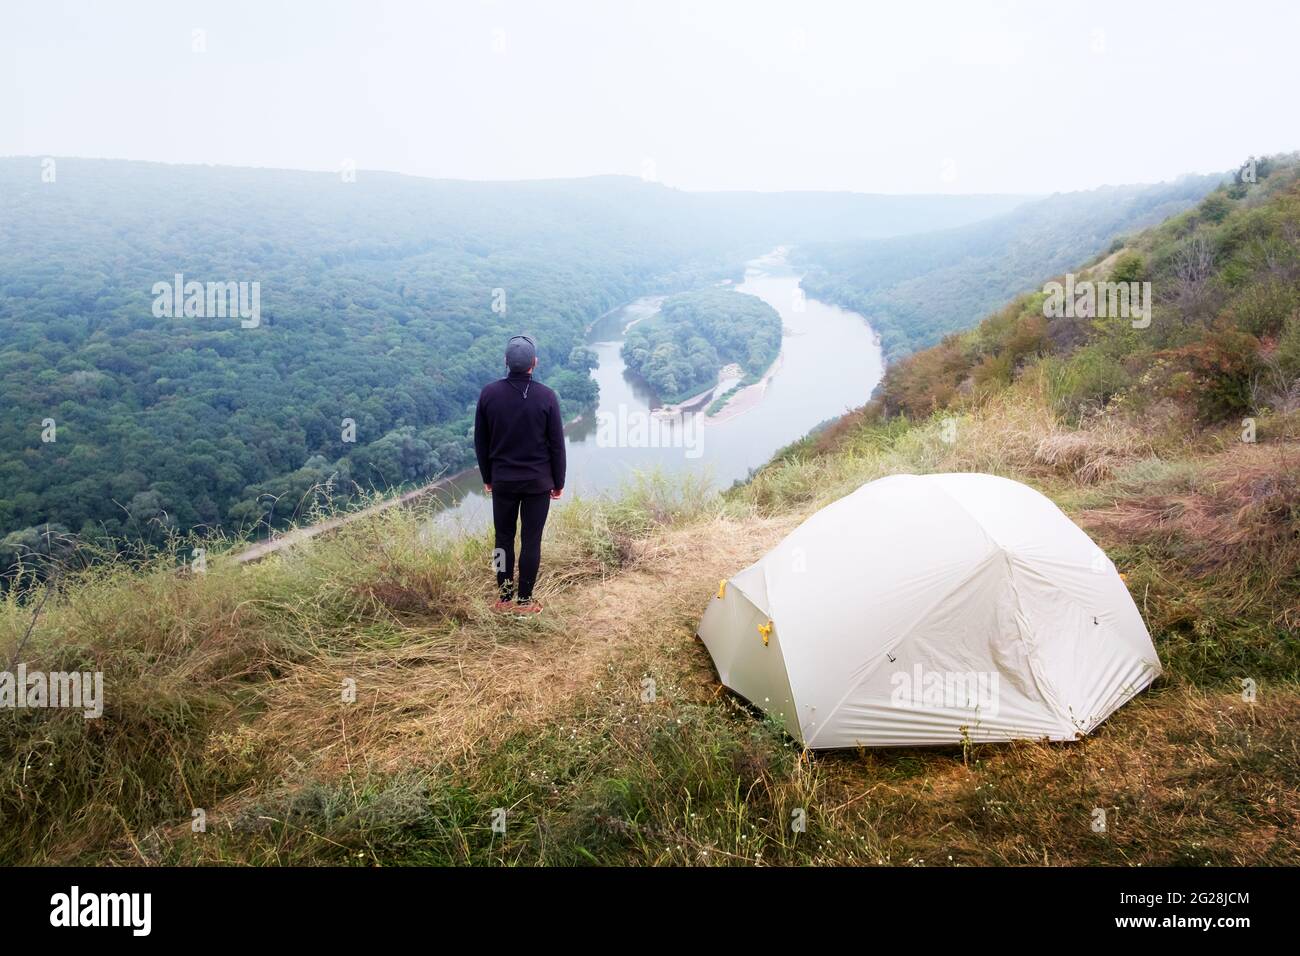 A tourist stands near a tent on the top of a mountain above the majestic Dniester River in Ukraine. Landscape photography Stock Photo